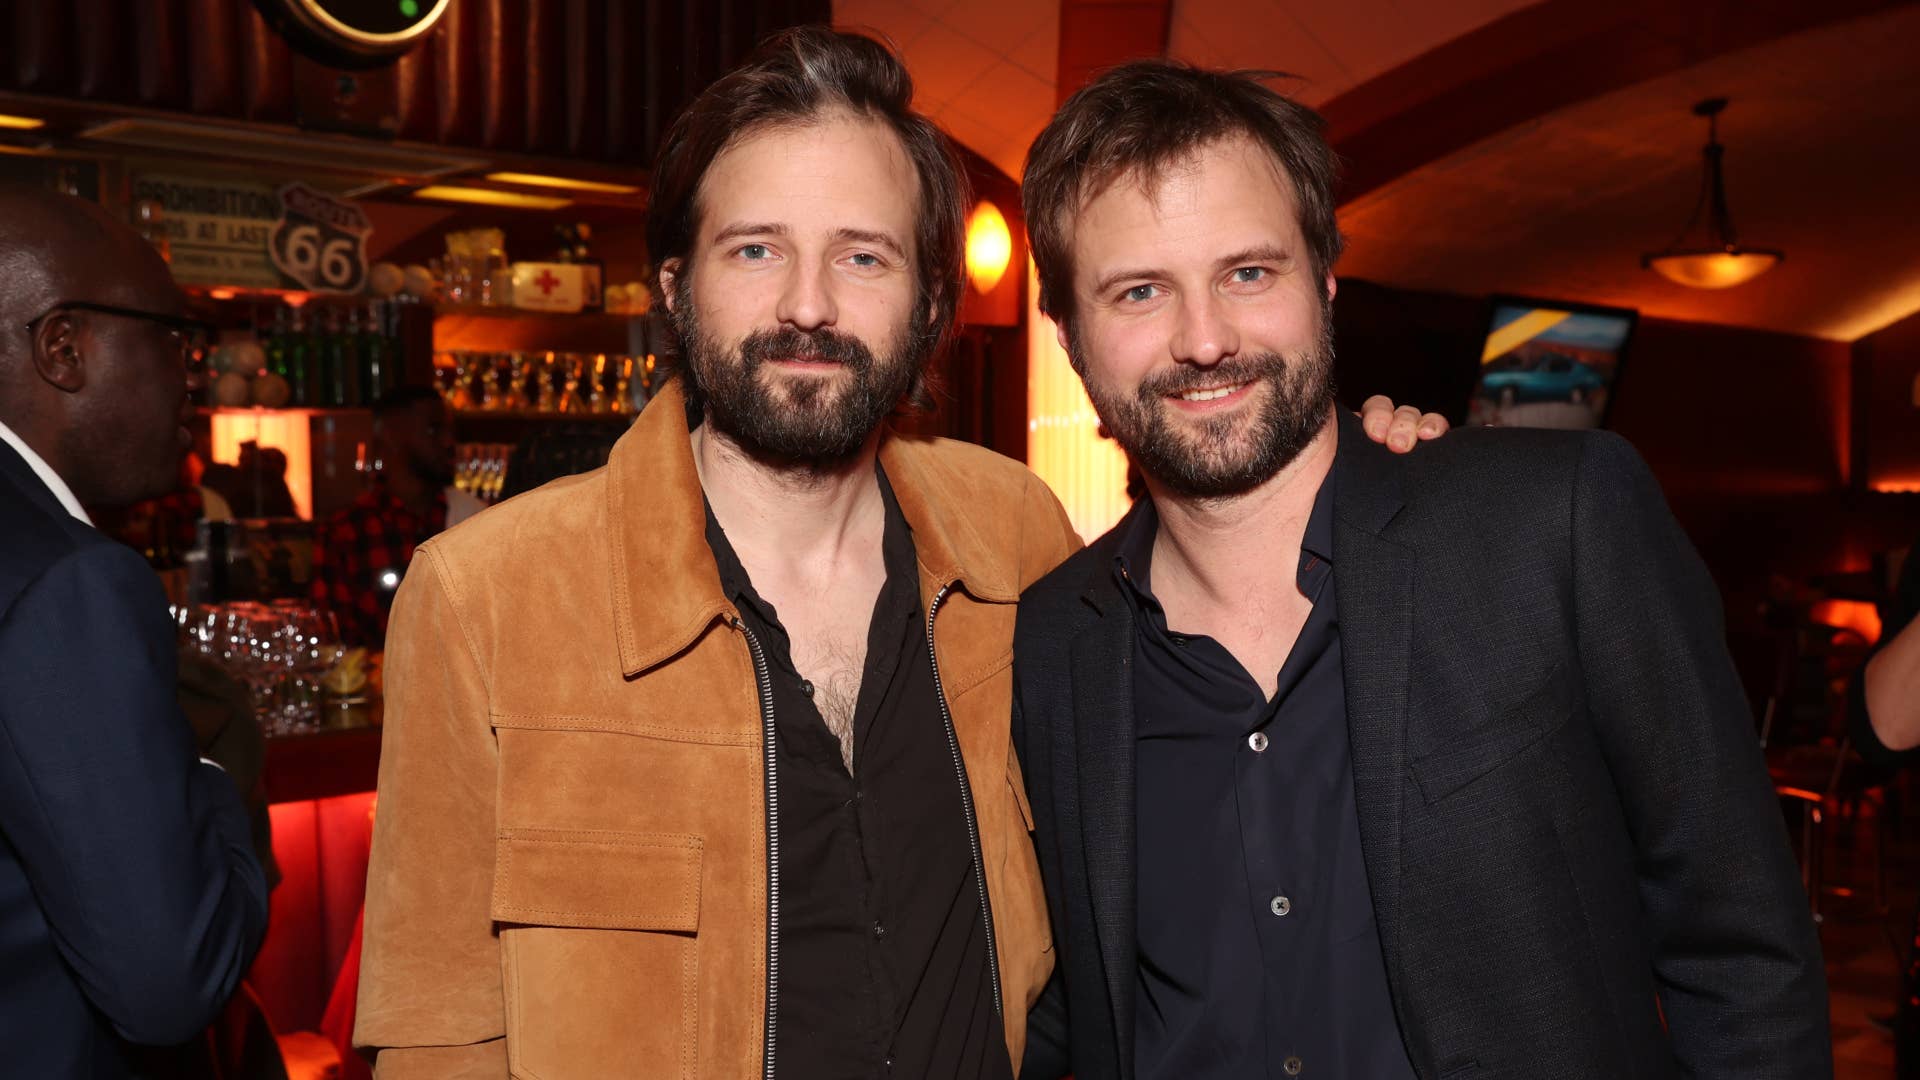 Stranger Things Duffer Brothers hanging out